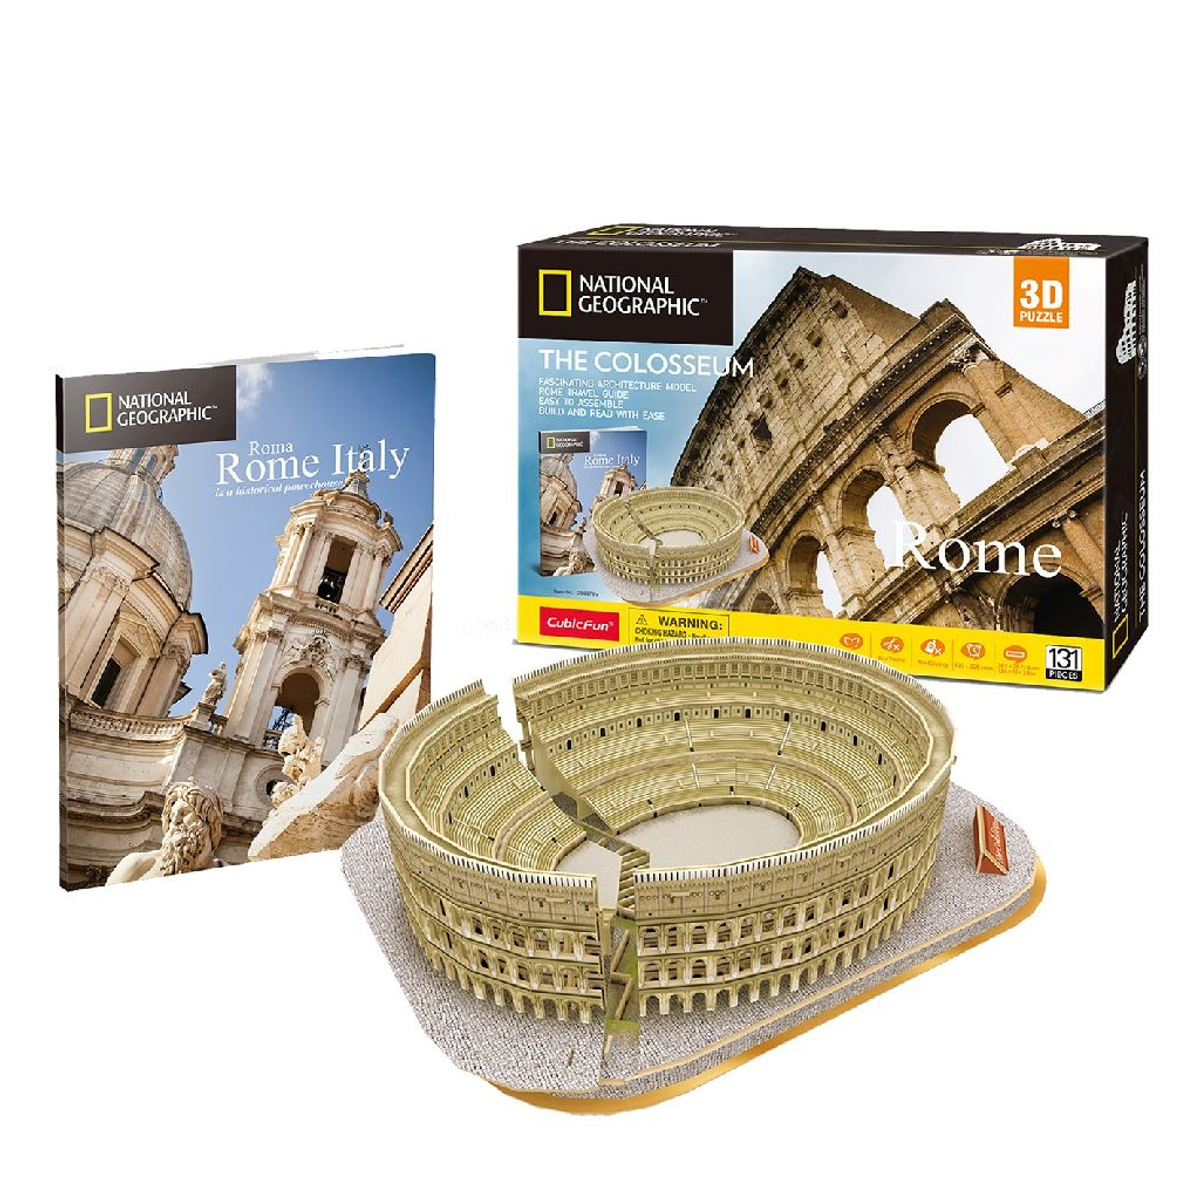 Colosseum The Puzzle GEOGRAPHIC NATIONAL